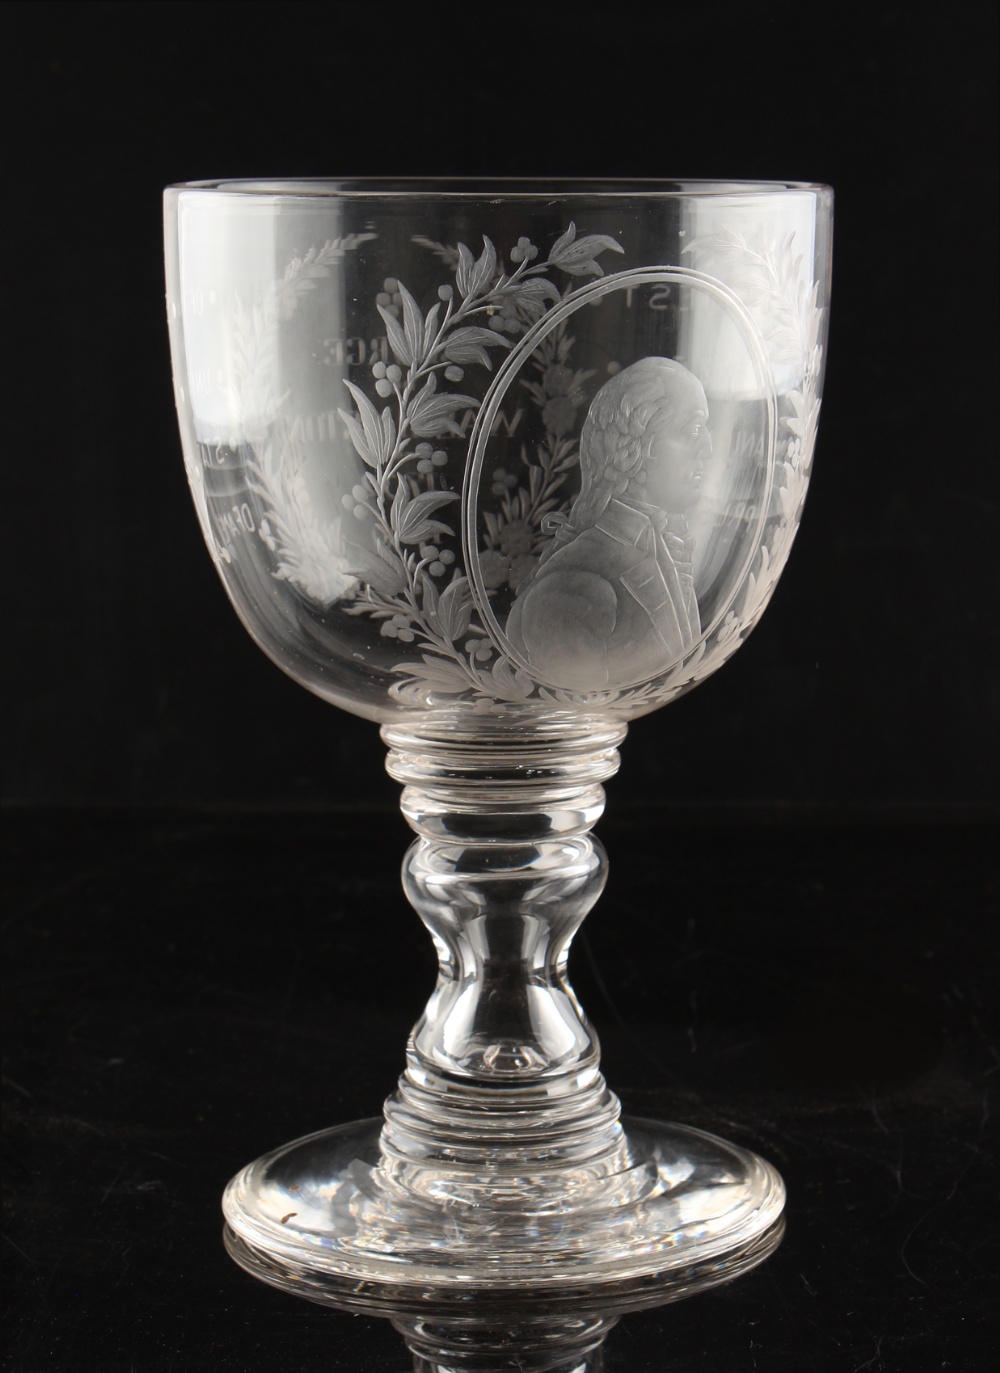 Property of a gentleman - American interest - a large 19th century engraved glass commemorative